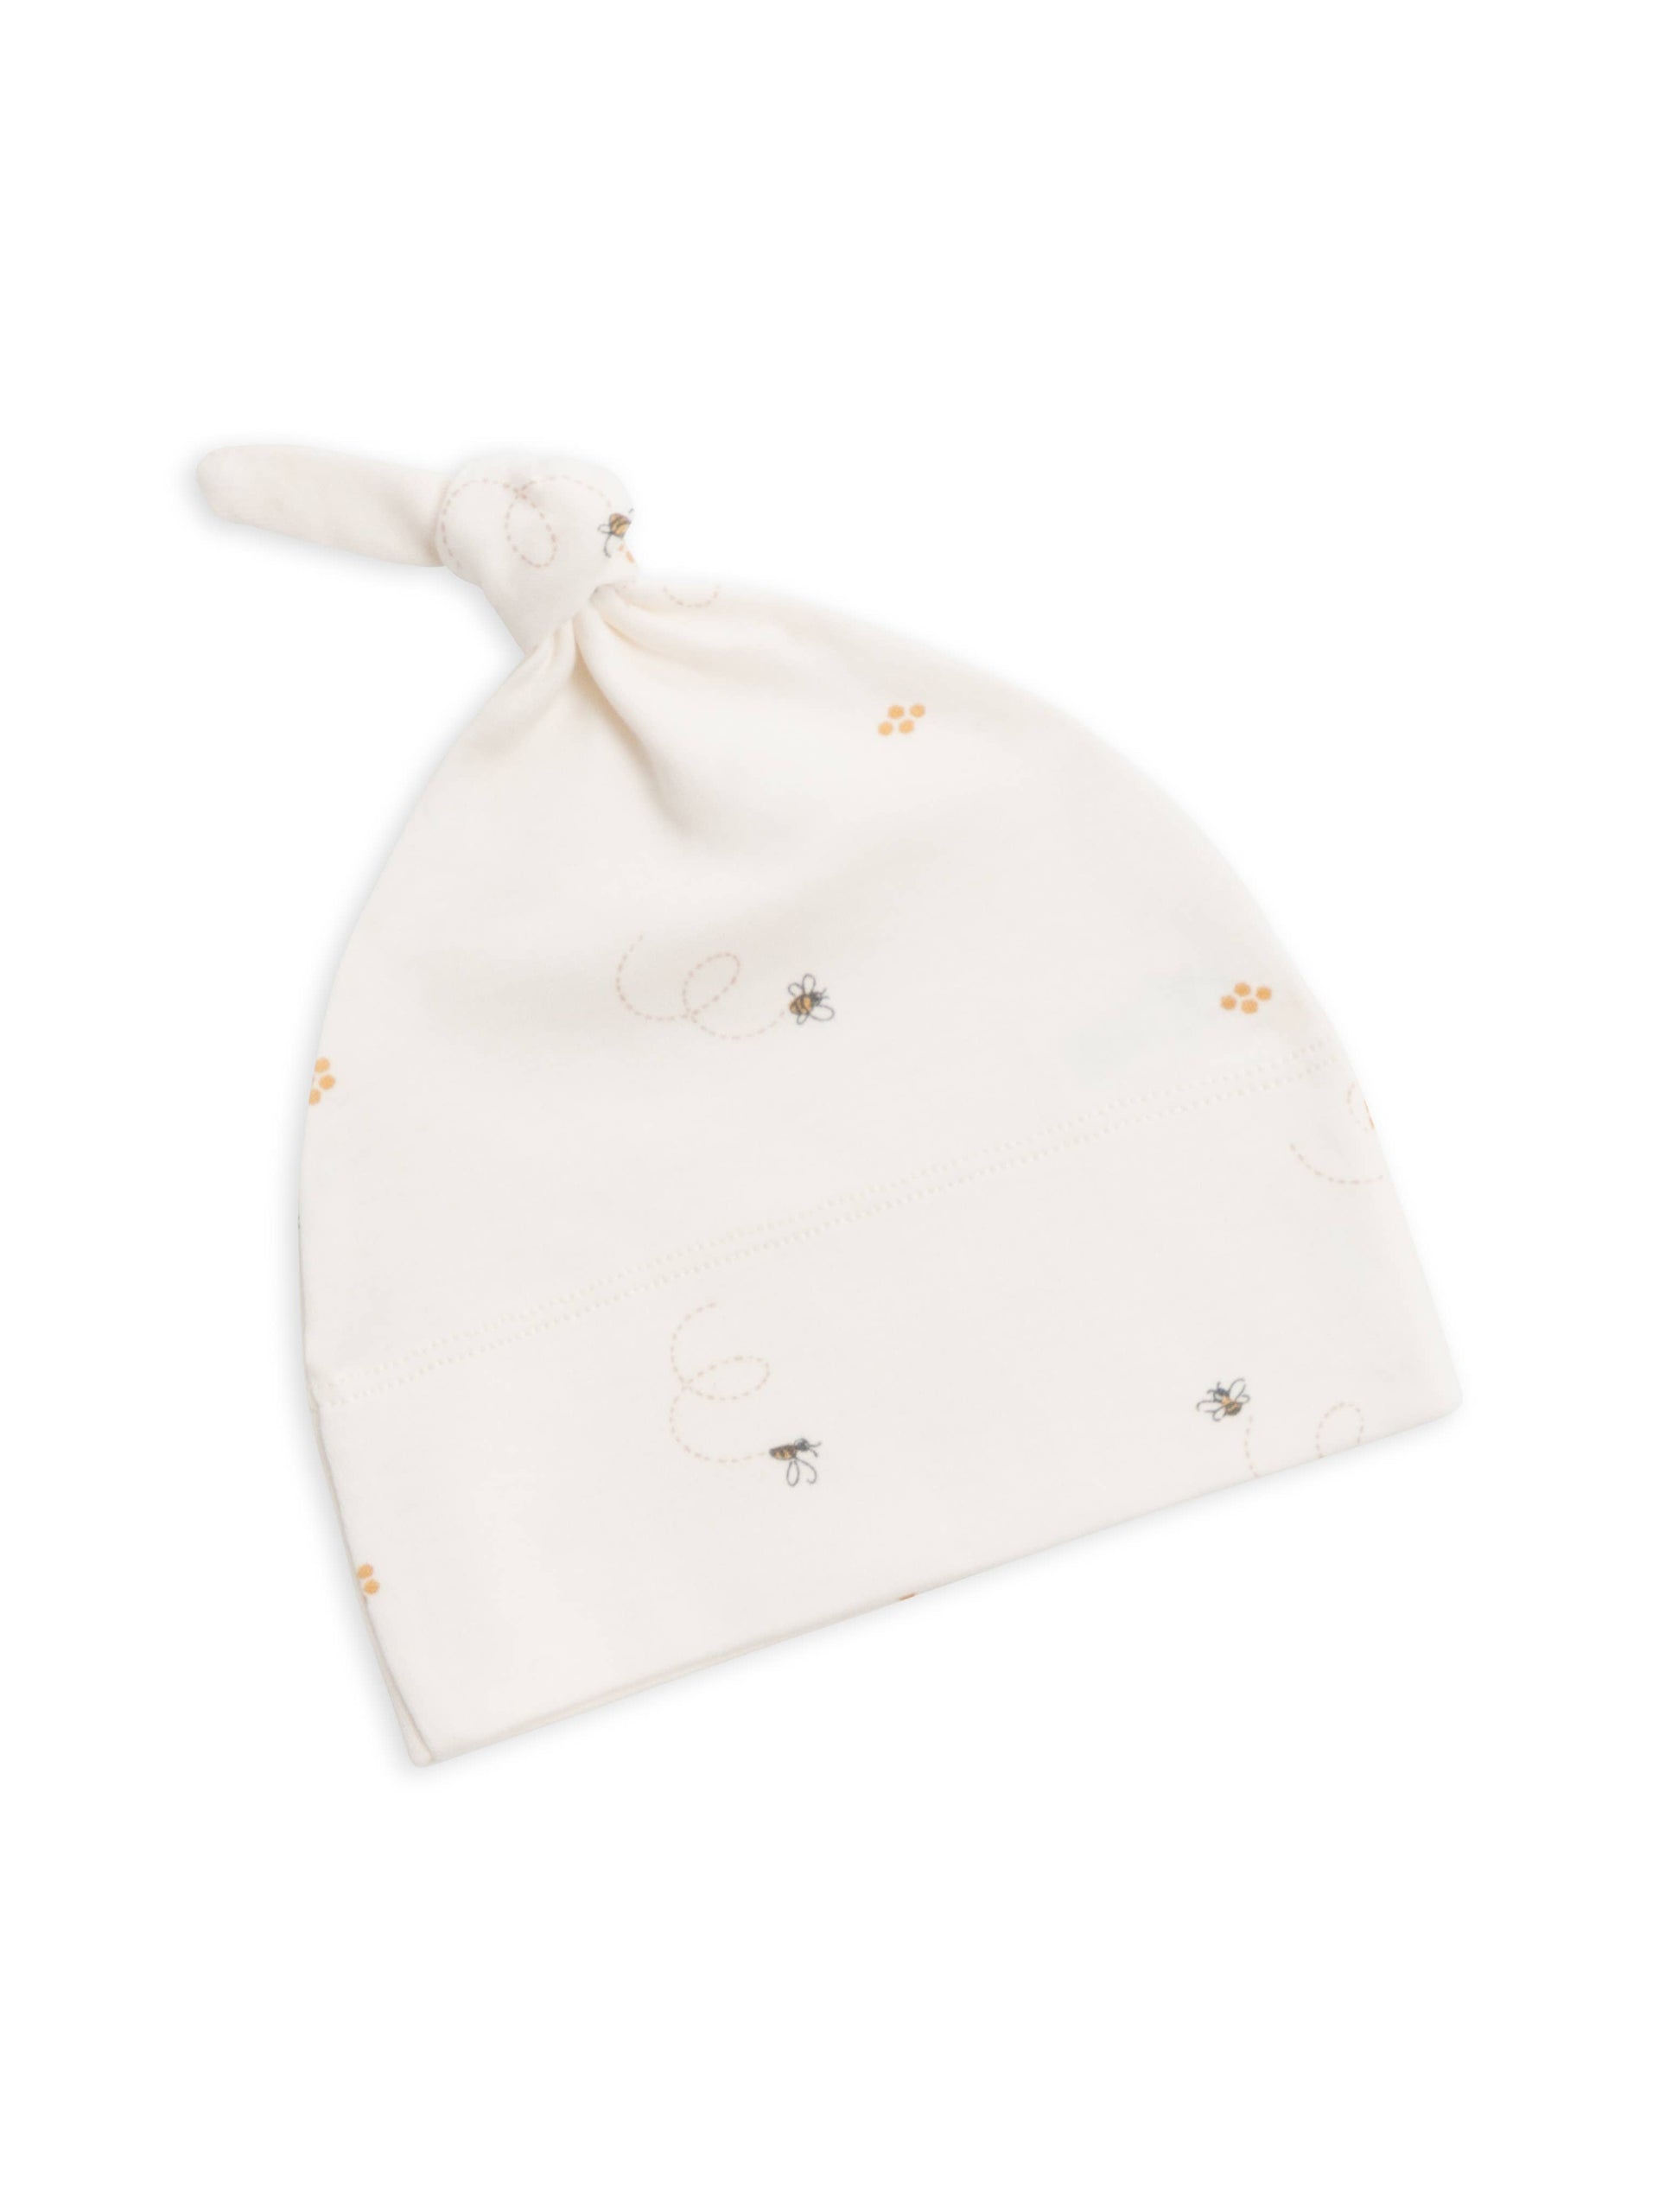 Colored Organics - Organic Baby Knotted Hat - Bee: M-L